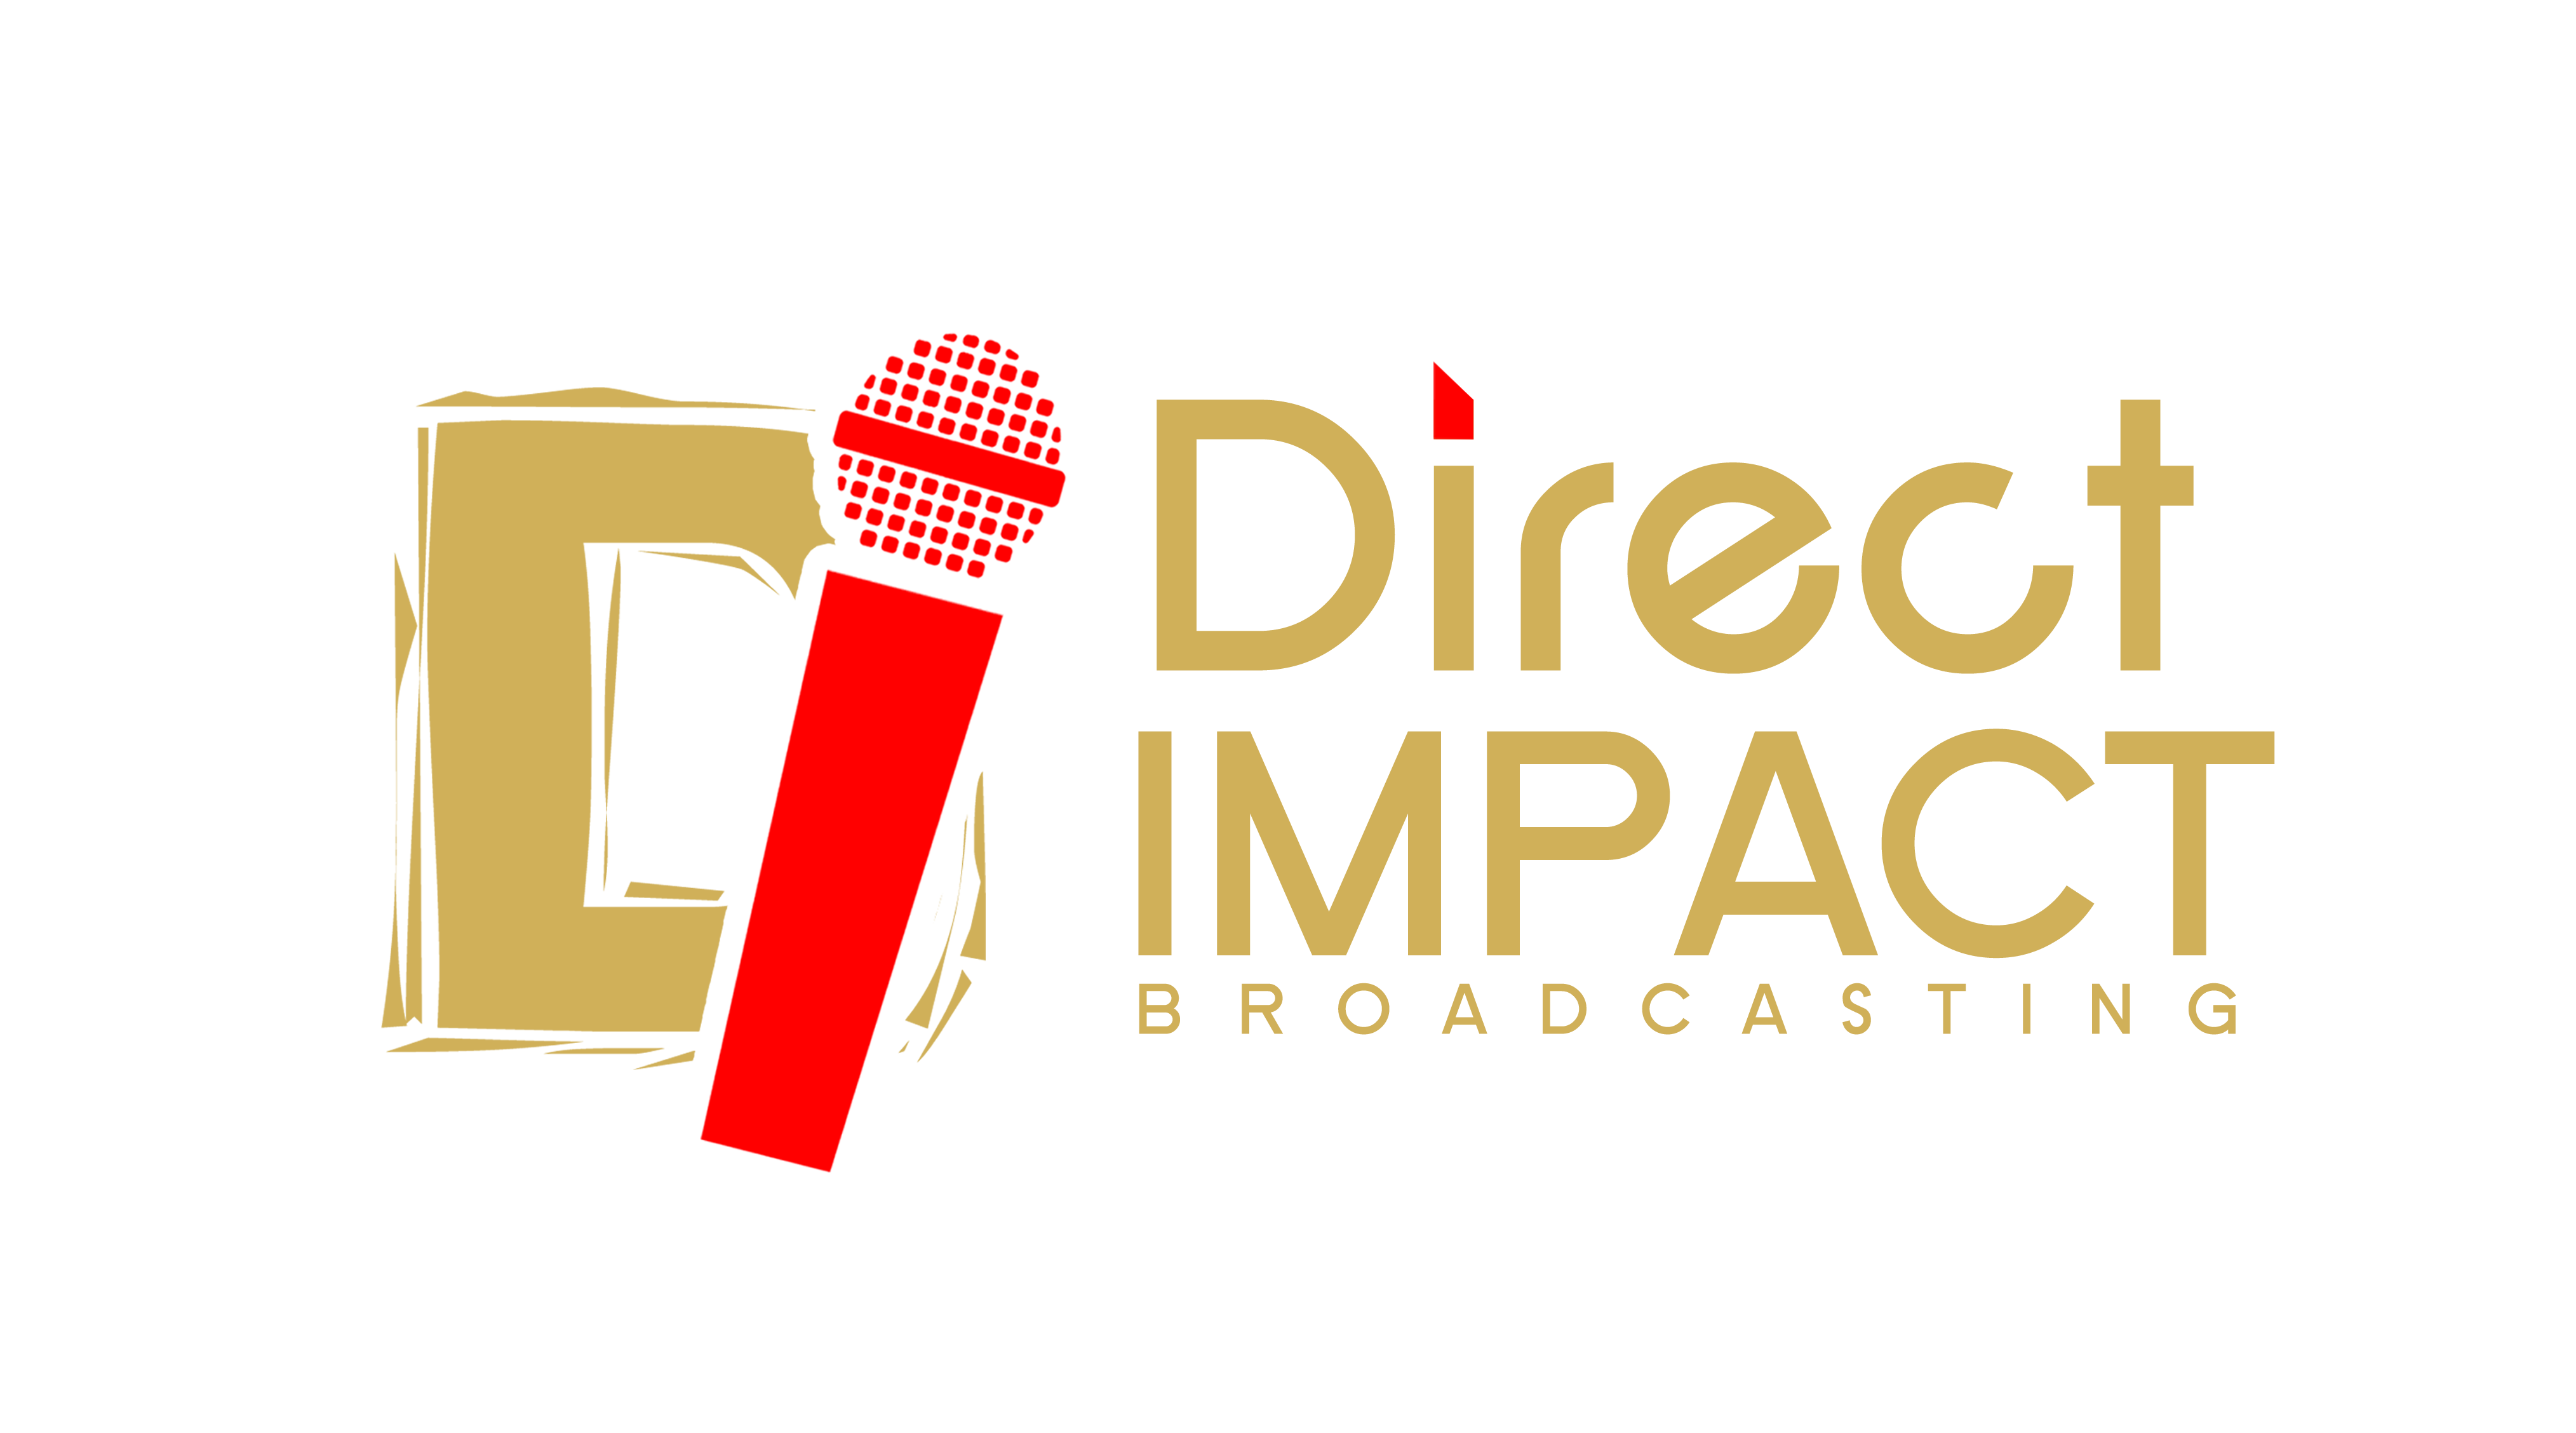 Direct Impact Broadcasting Network